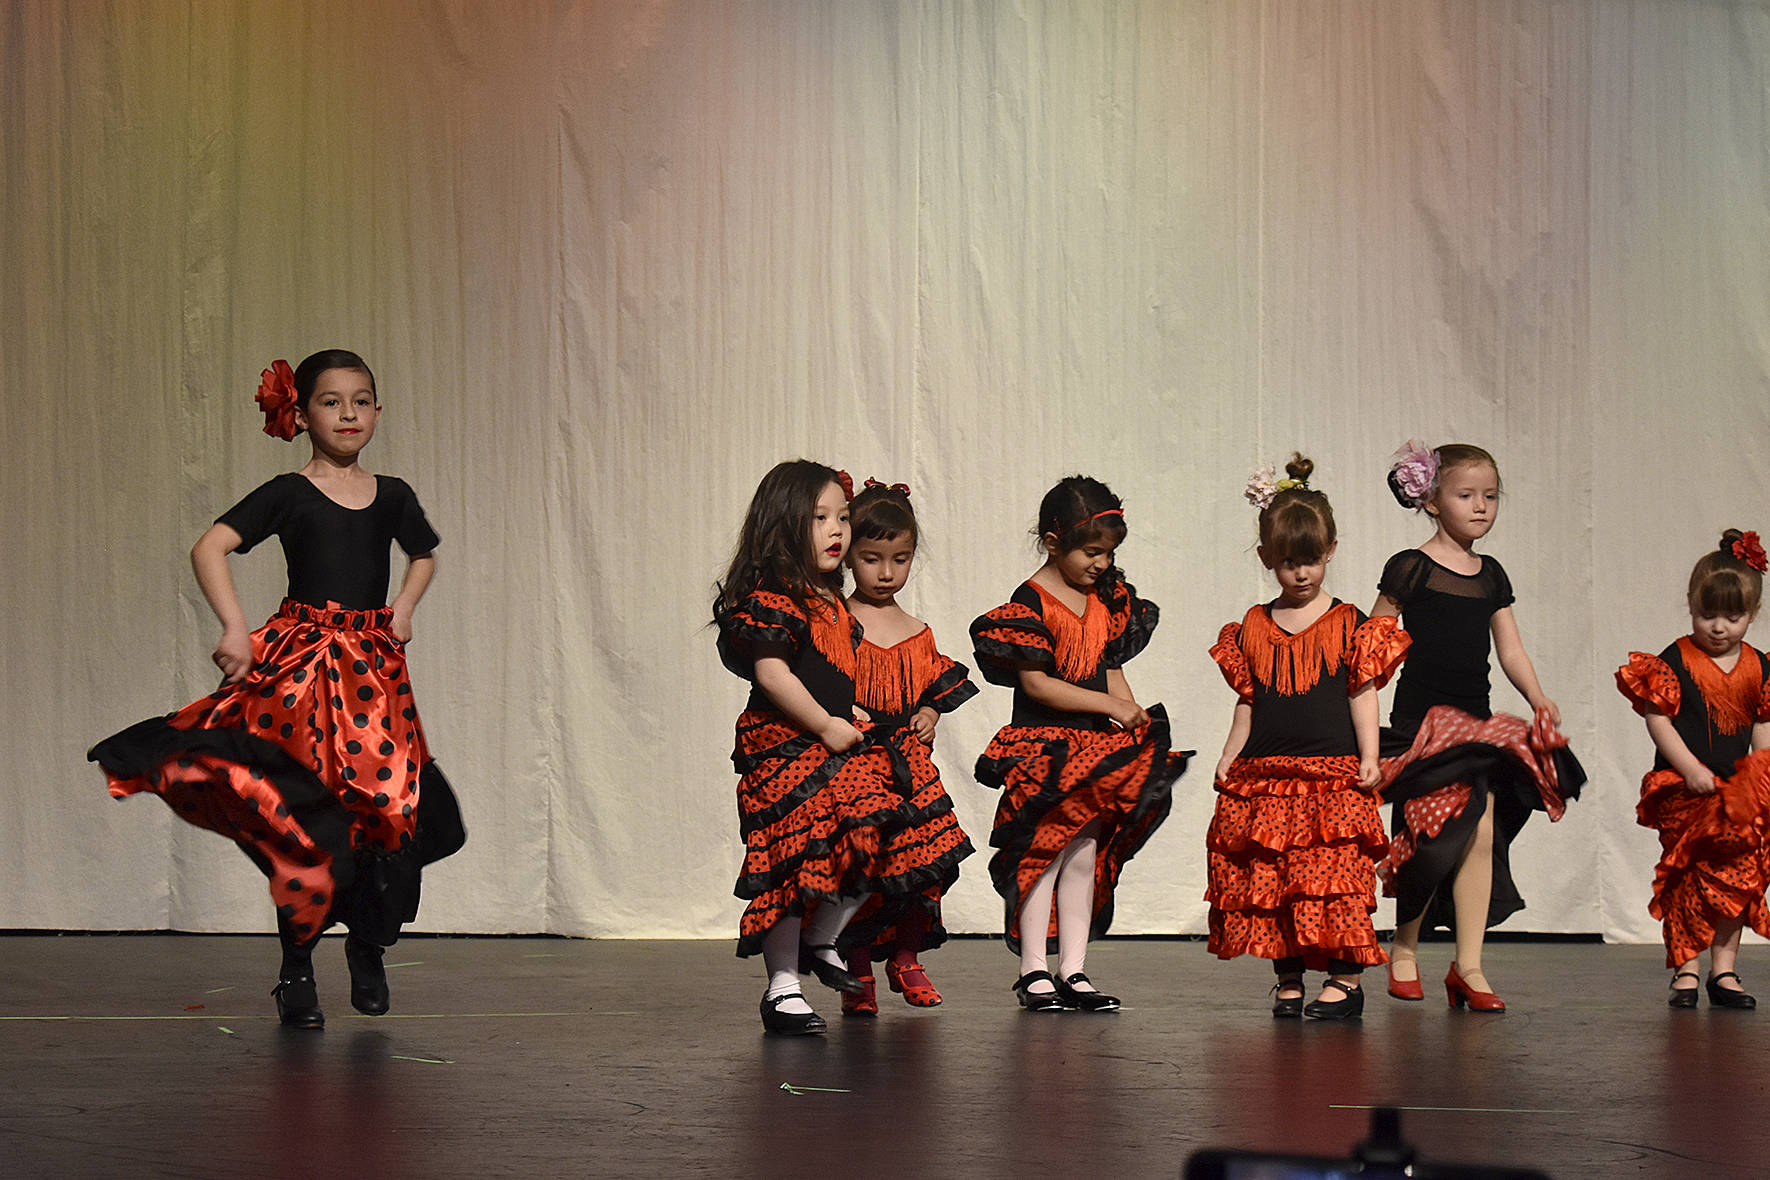 Photos by Haley Ausbun                                Semilla Flamenca in Redmond had their spring recital Friday, April 26 at the Carco Theatre in Renton. Nearly 60 flamenco dancers, from 2 year olds to adults, were able to show off their skills in ten performances, concluding with a group dance of the Macarena. All proceeds for the recital went to a 6-year-old dancer who has been fighting leukemia for three years and is now in remission with monthly check-ups, flamenco teacher Paulina Chalita-White said.